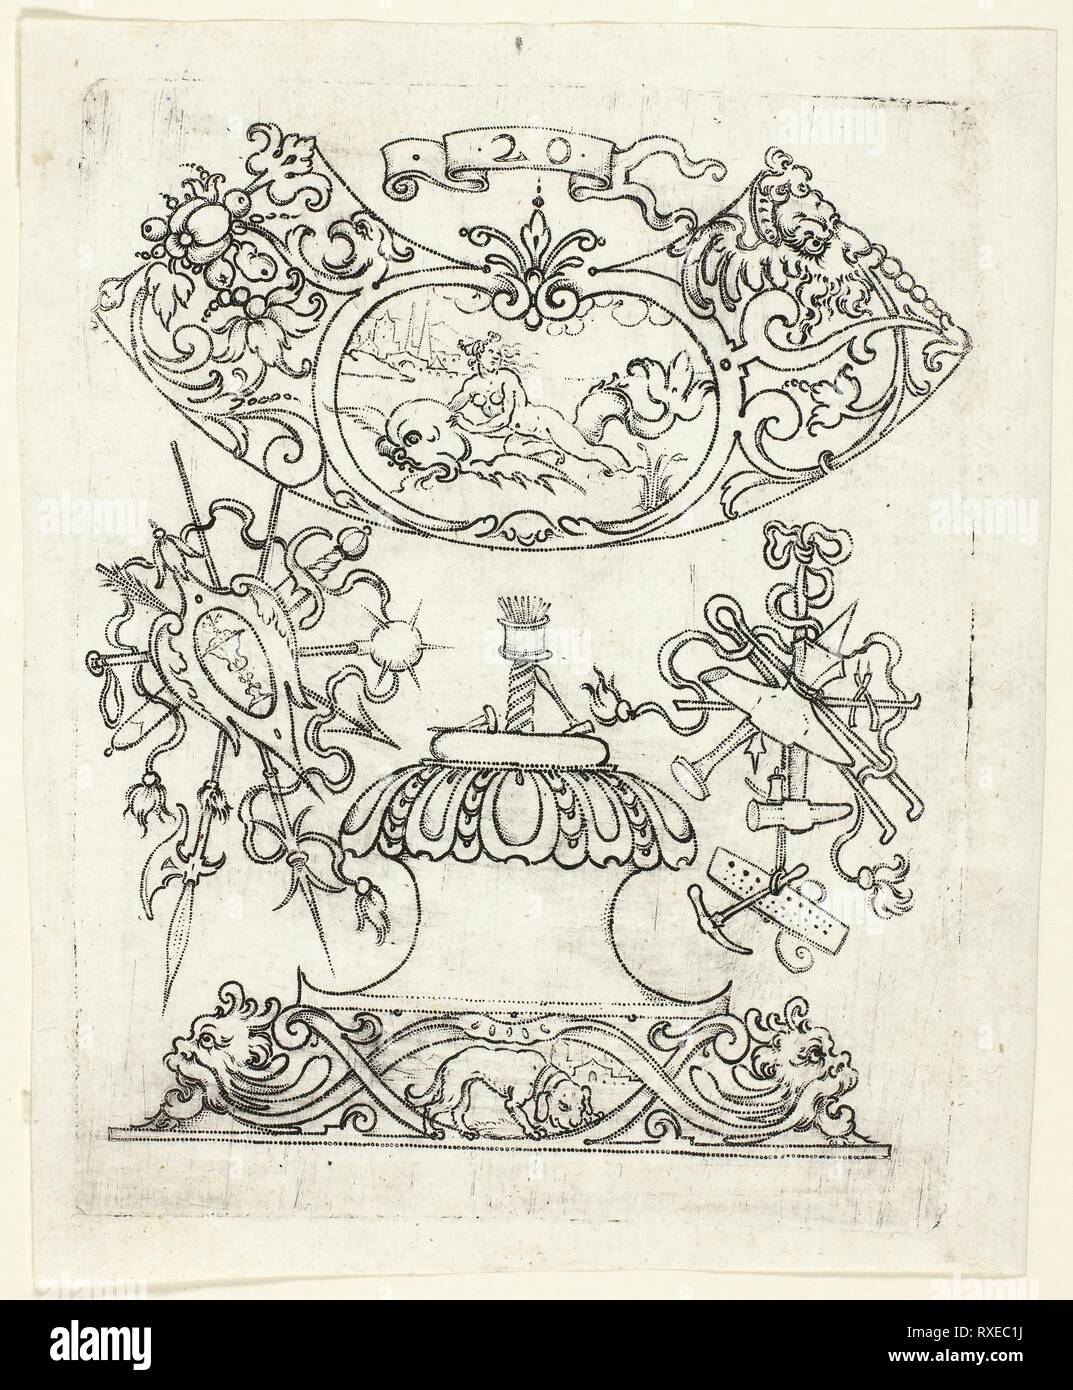 Plate 20, from twenty ornamental designs for goblets and beakers. Master A.P.; German, active early 17th century. Date: 1604. Dimensions: 120 x 105 mm (image); 130 x 105 mm (plate); 150 x 115 mm (sheet). Punch engraving in black on ivory laid paper. Origin: Germany. Museum: The Chicago Art Institute. Stock Photo